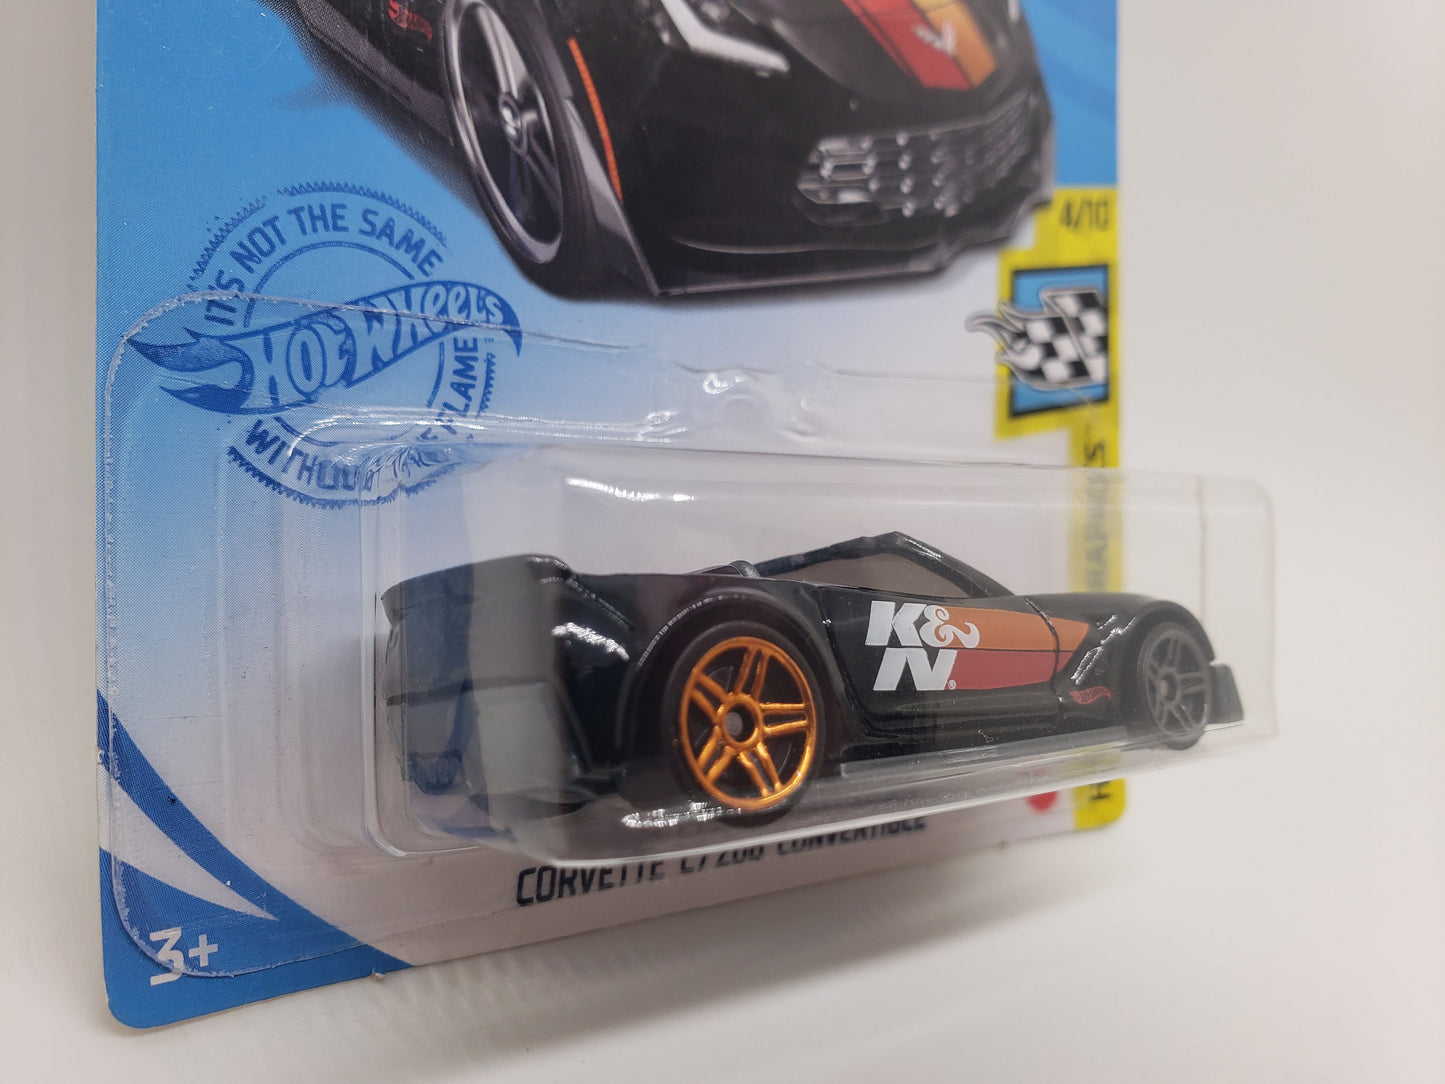 Hot Wheels Corvette C7 Z06 Convertible Black HW Speed Graphics Birthday Gift Miniature Collectable Model Toy Car